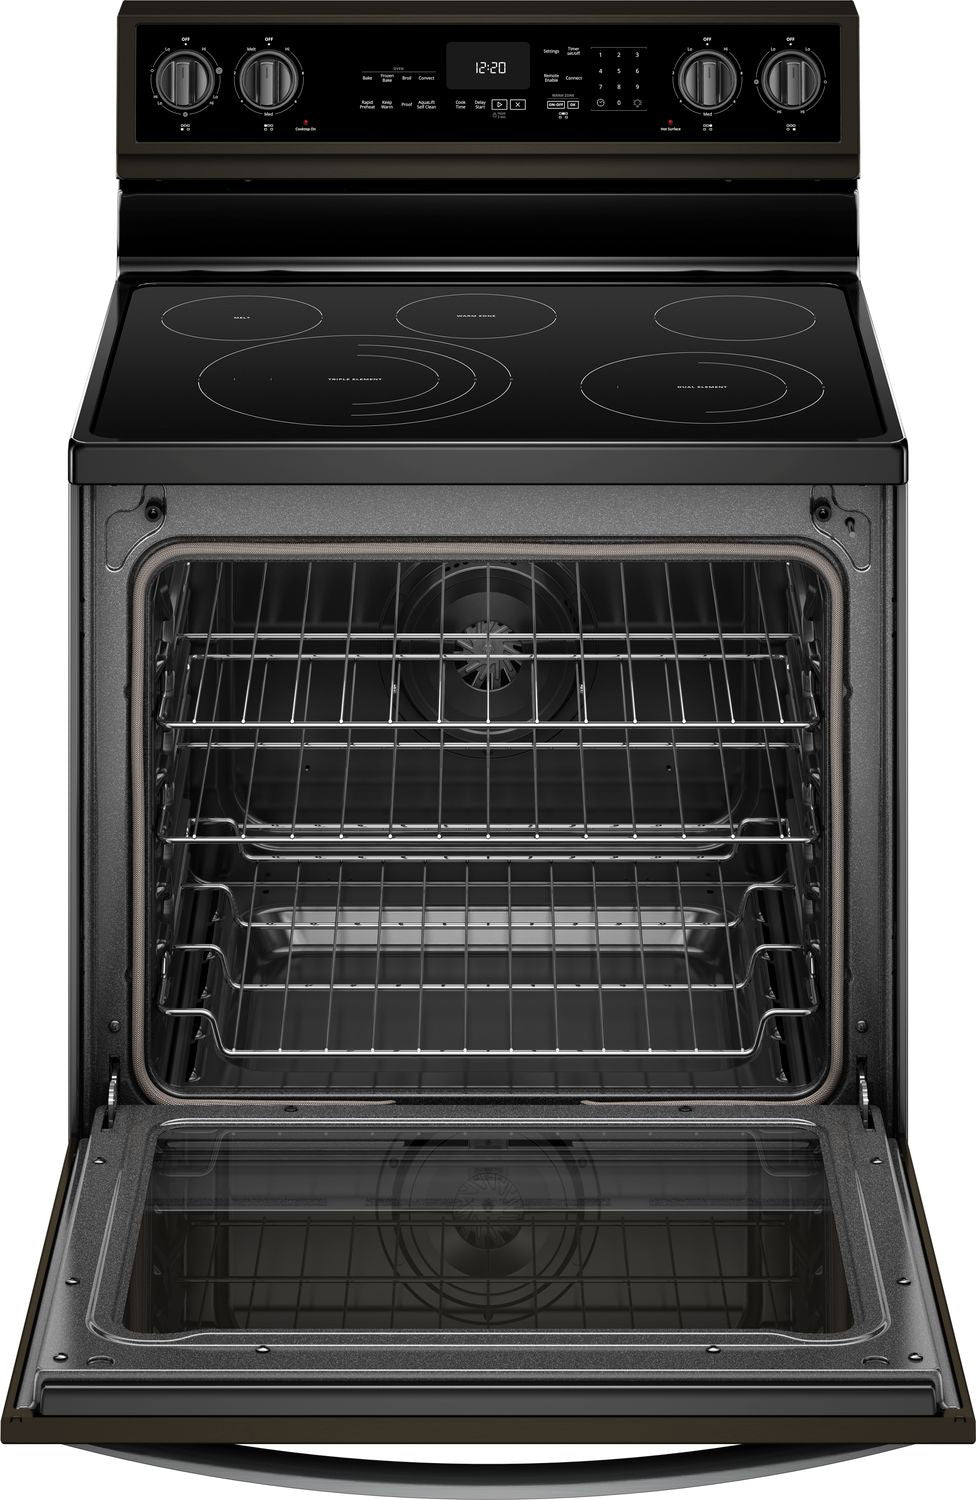 Whirlpool Black Stainless Steel Freestanding Electric Convection Range (6.4 Cu. Ft.) - YWFE975H0HV